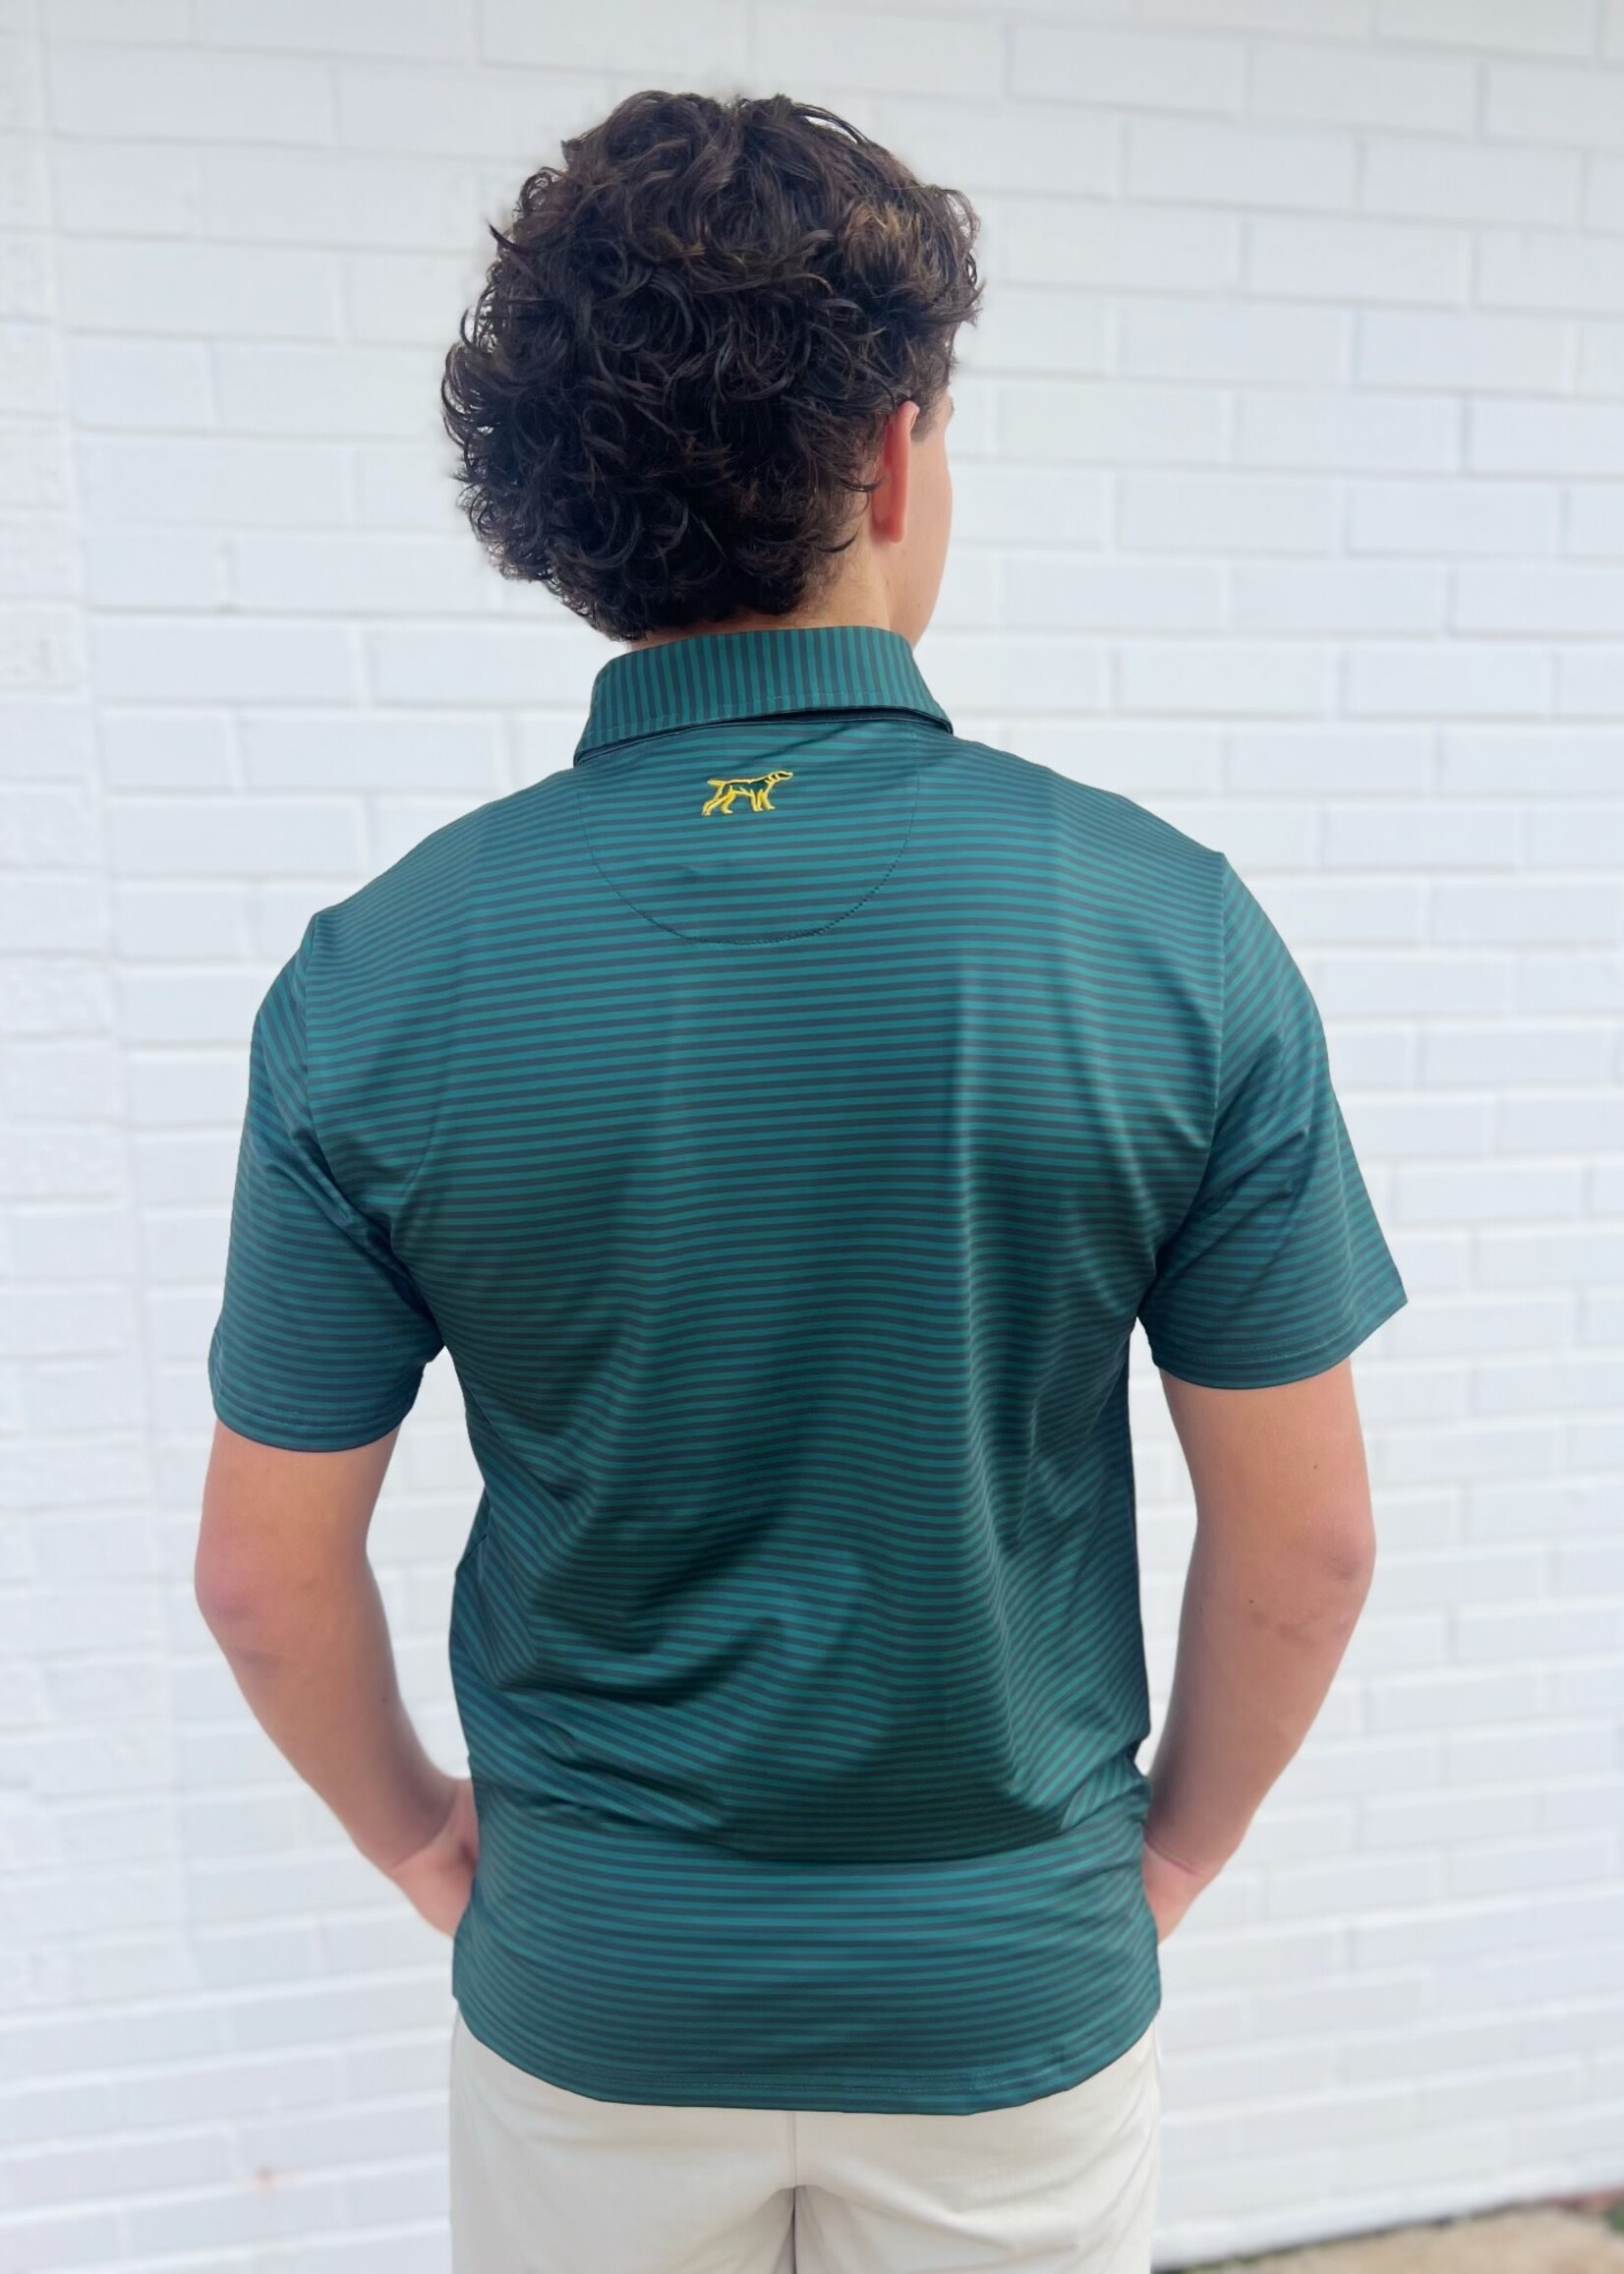 Bloom and Company Men's Green Performance Polo